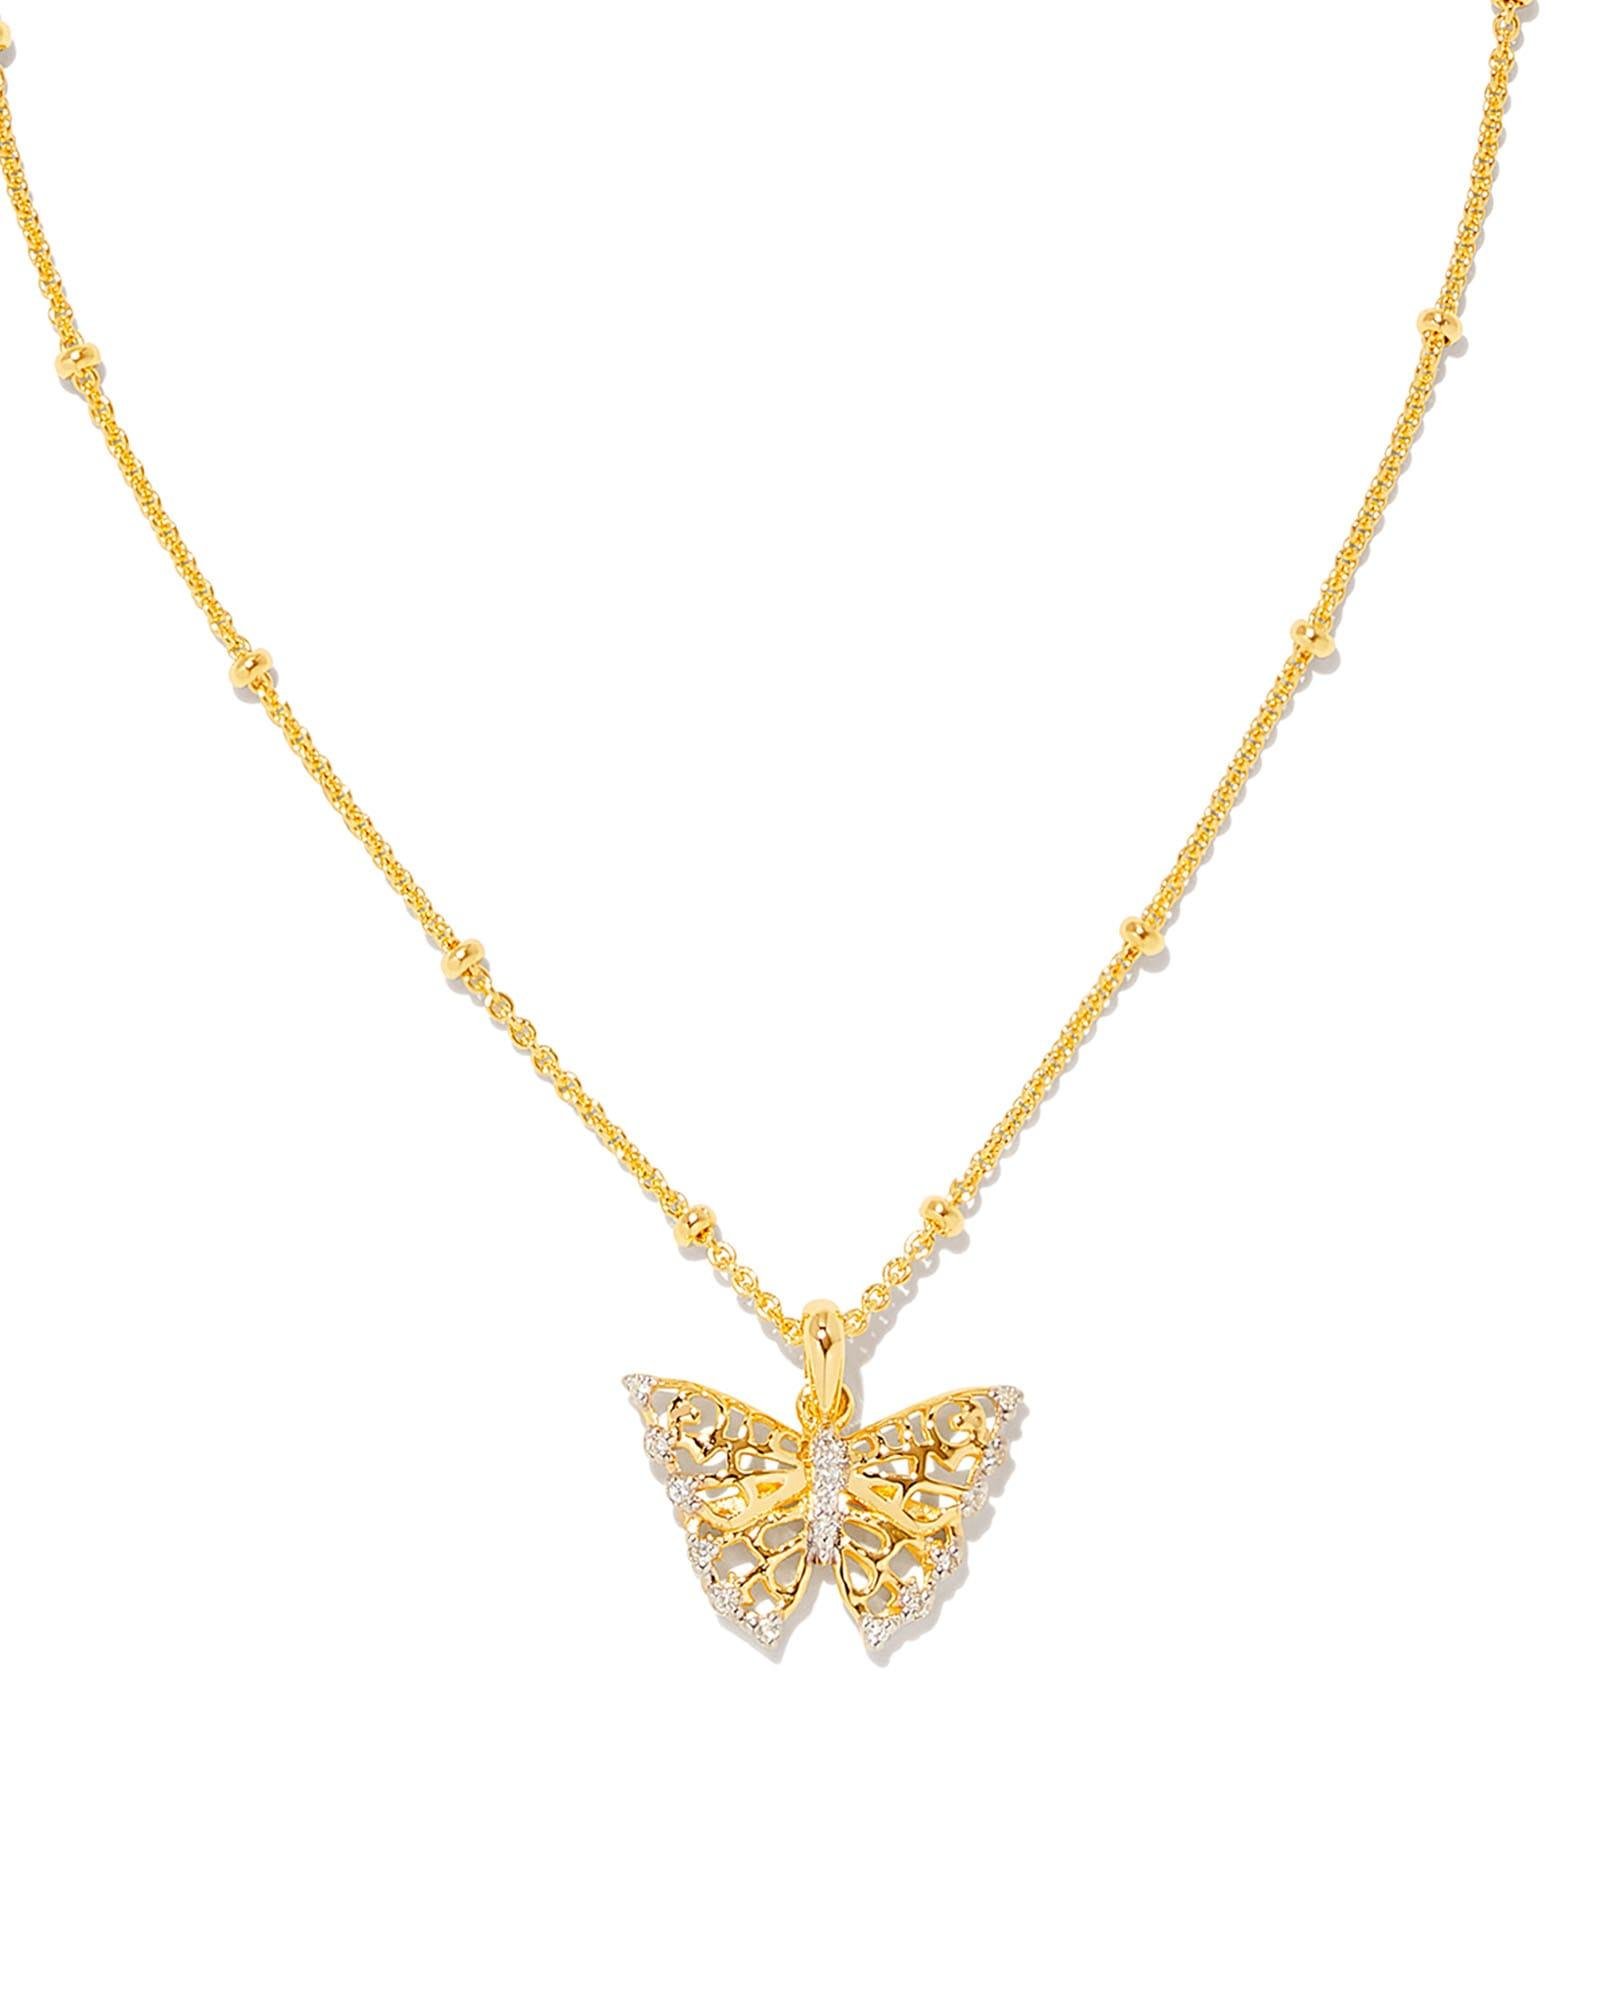 Elisa Curb Chain Necklace in 18k Gold Vermeil